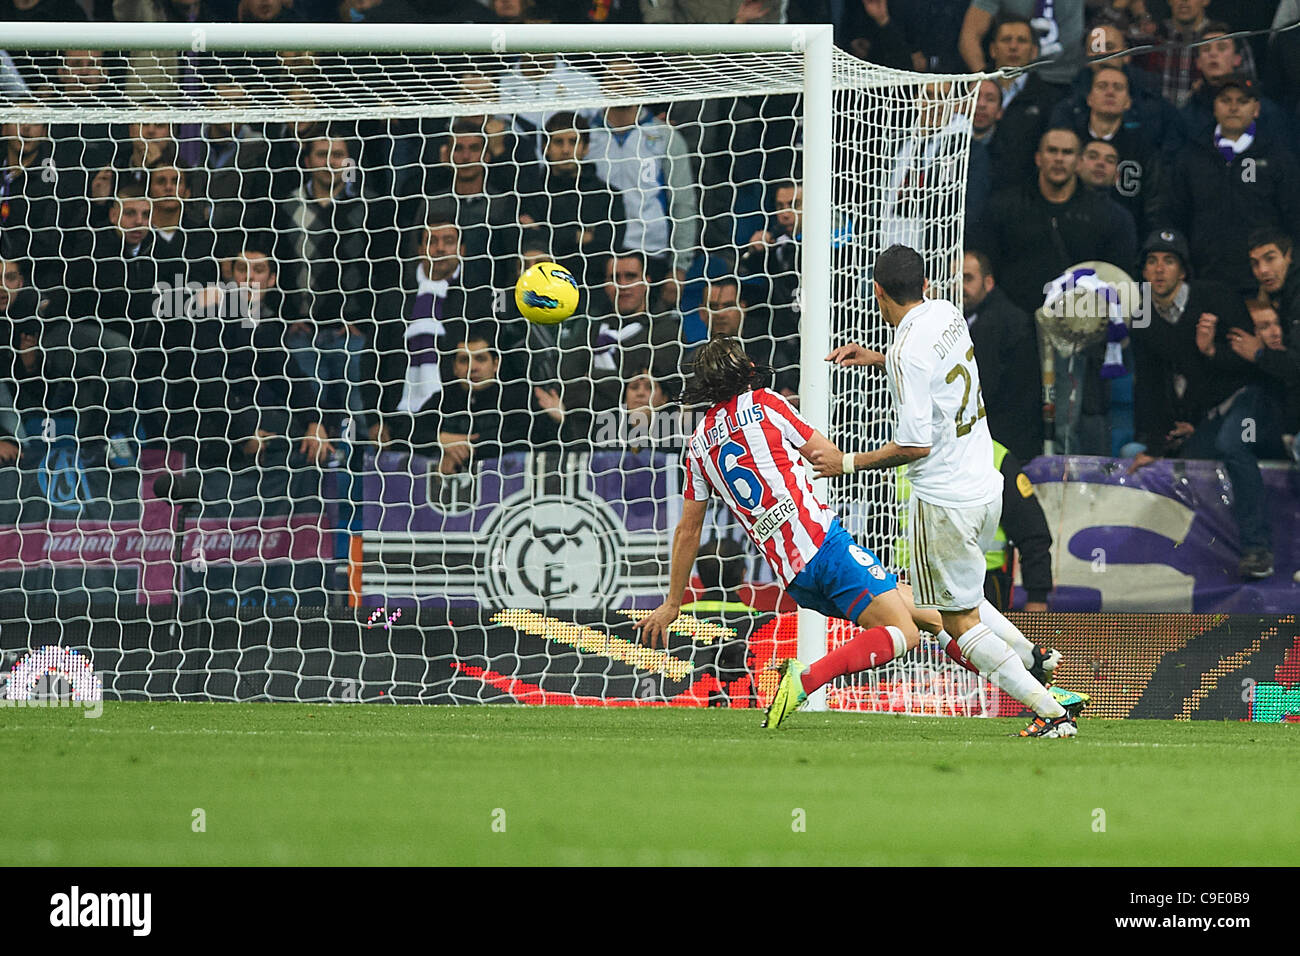 26.11.2011.  MADRID, SPAIN -  Angel Di Maria (r) of Real Madrid scores a goal  with Filipe Luis (l) of Atletico de Madrid in apposition during the La Liga match played between Real Madrid and Atletico de Madrid at Santiago Bernabeu stadium on November 26 in Madrid, Spain. Stock Photo